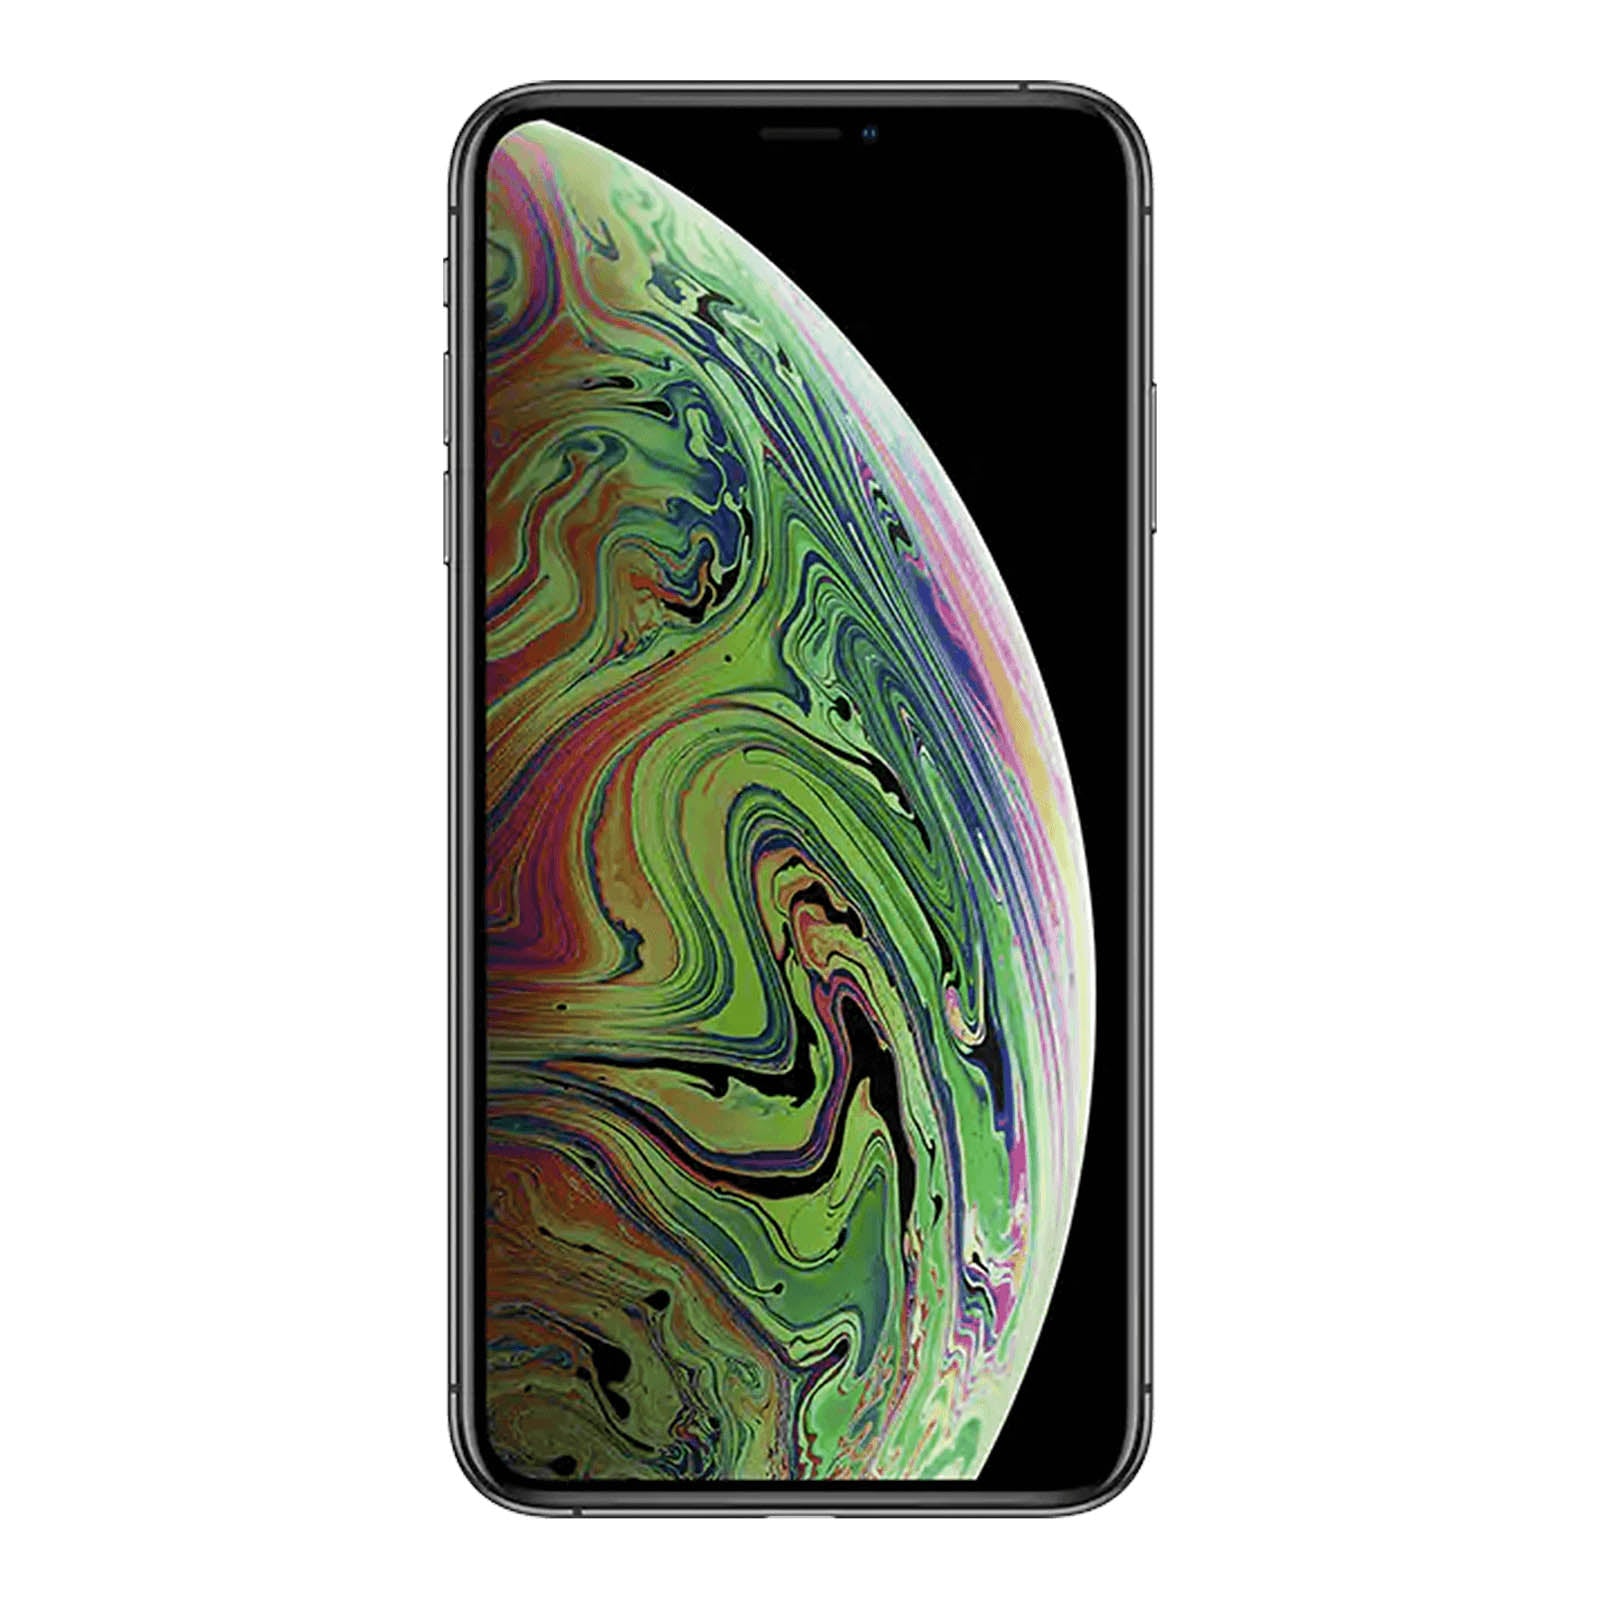 Apple iPhone XS 64GB Space Grey Good - T-Mobile